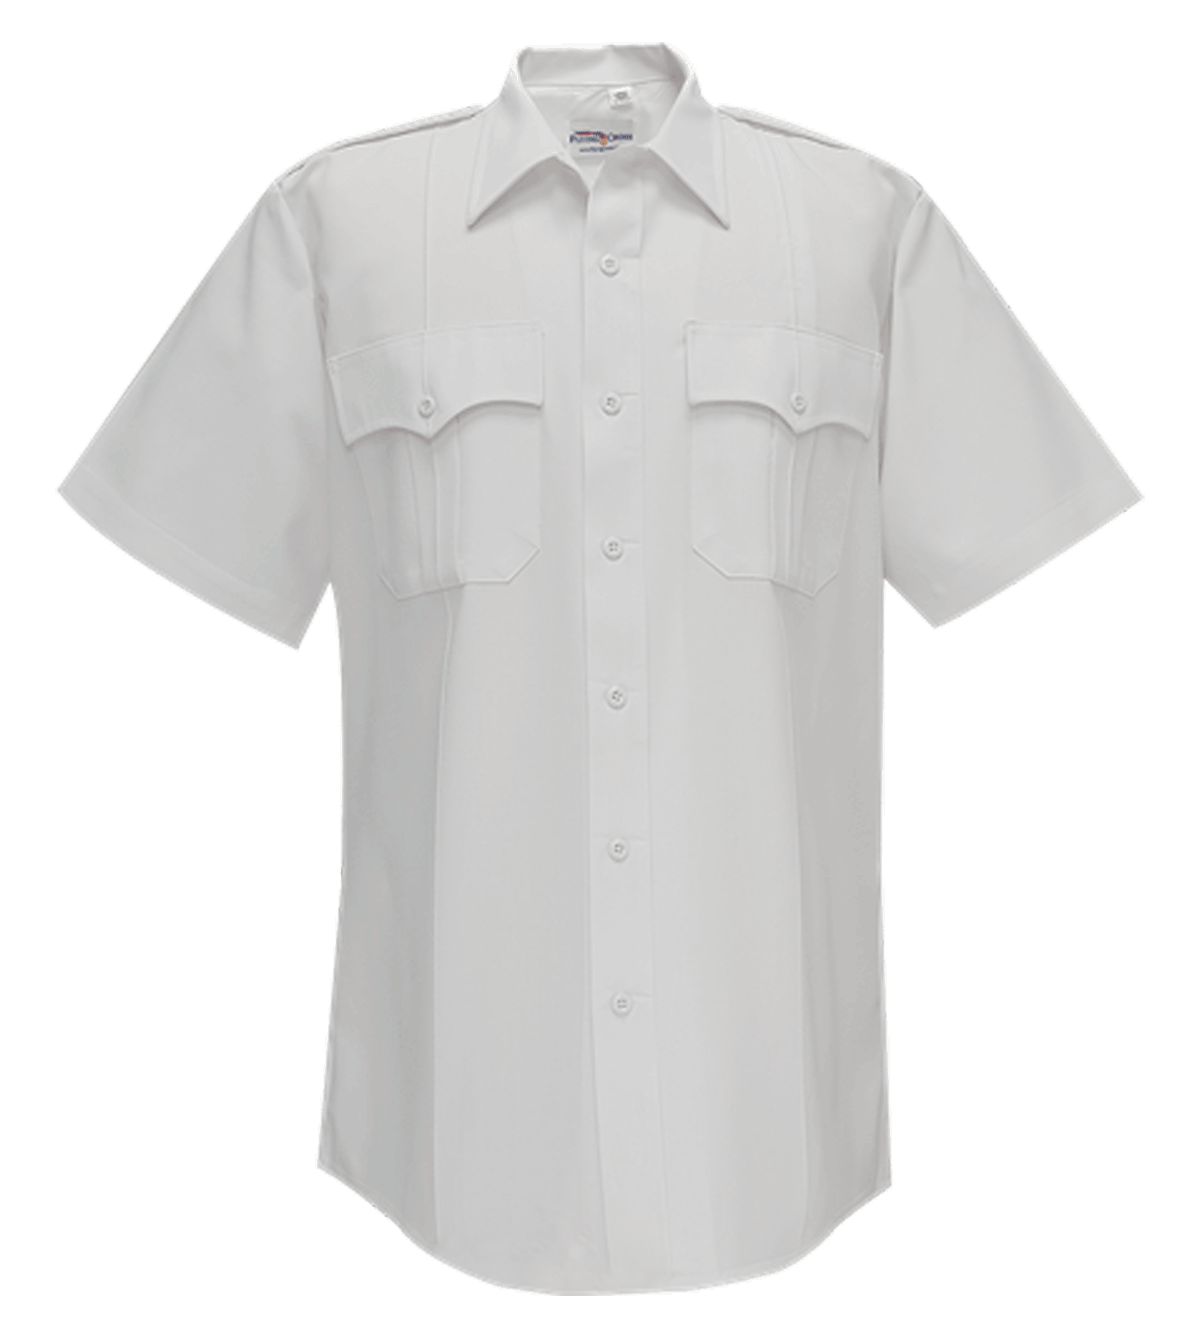 Chief Officers S/S Shirt